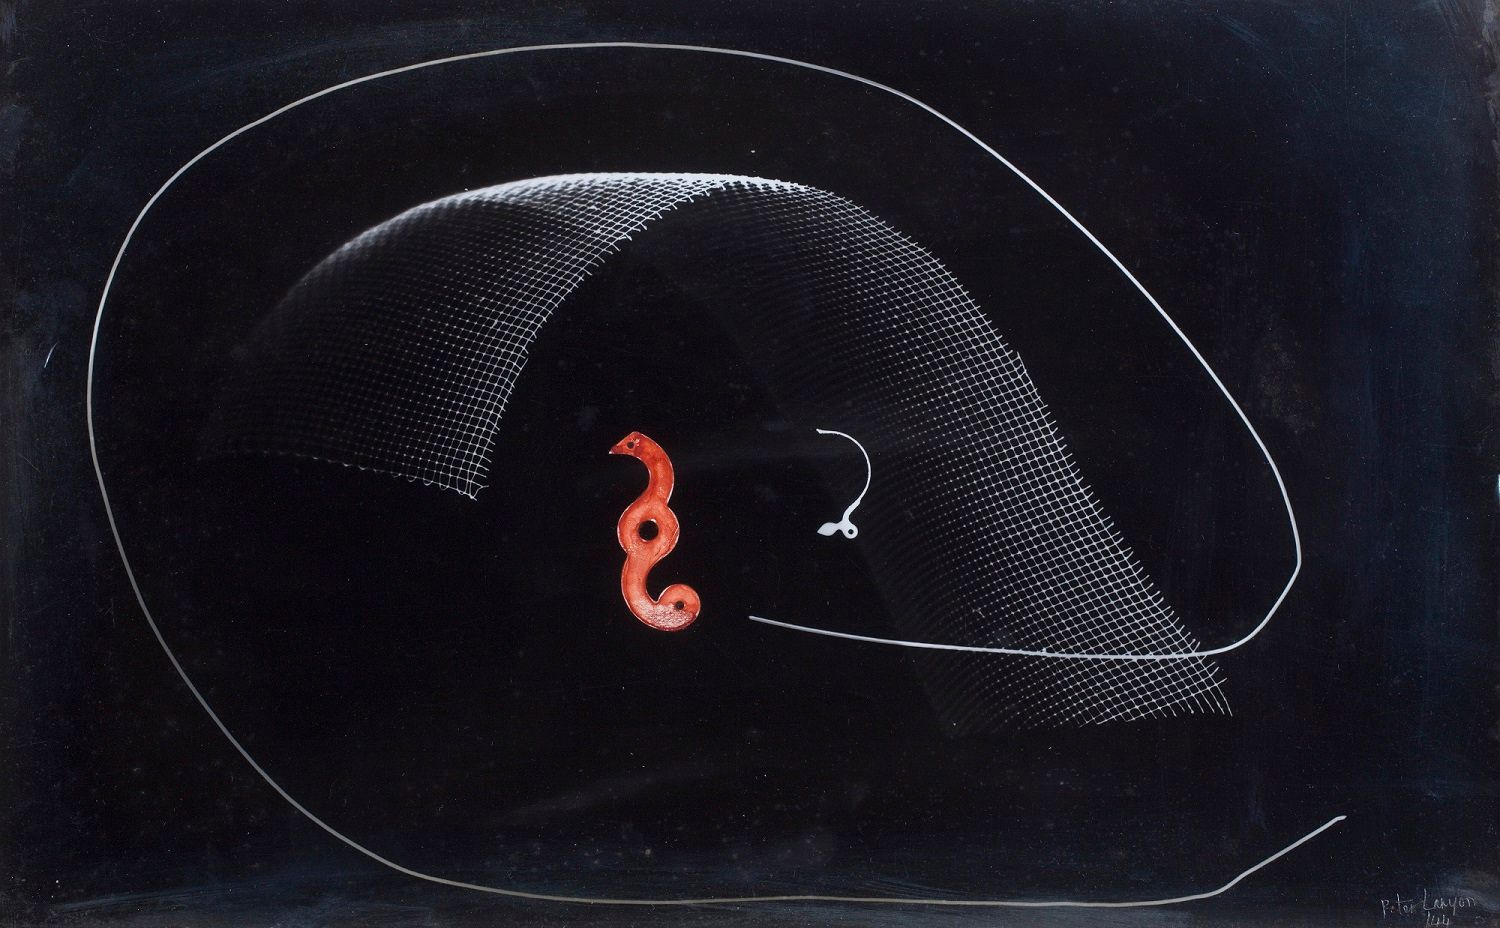 Photogram with a Red Object